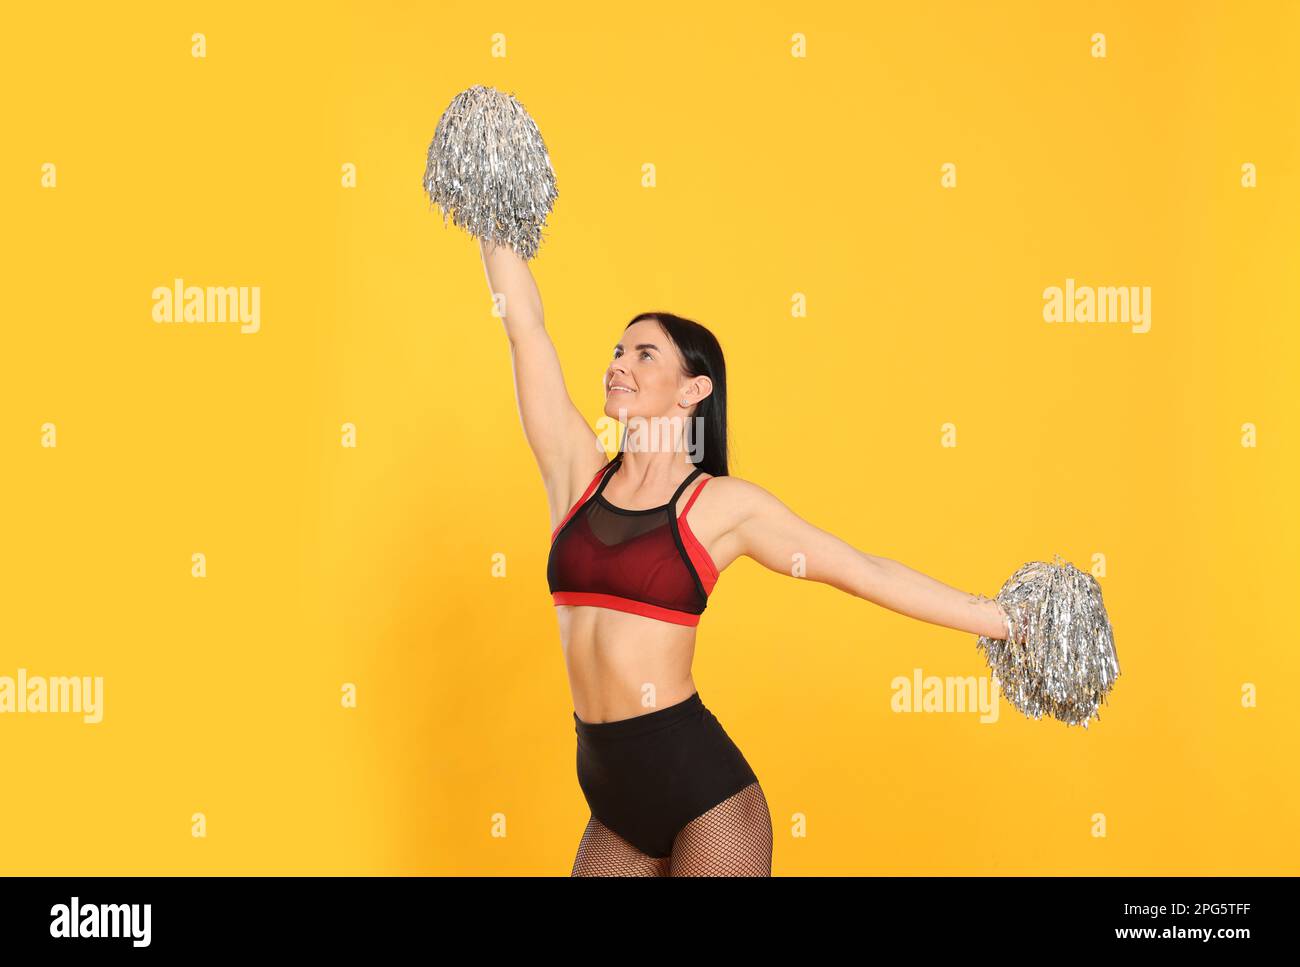 Smiling cheerleader girl posing with pom poms. Isolated on white Stock  Photo - Alamy